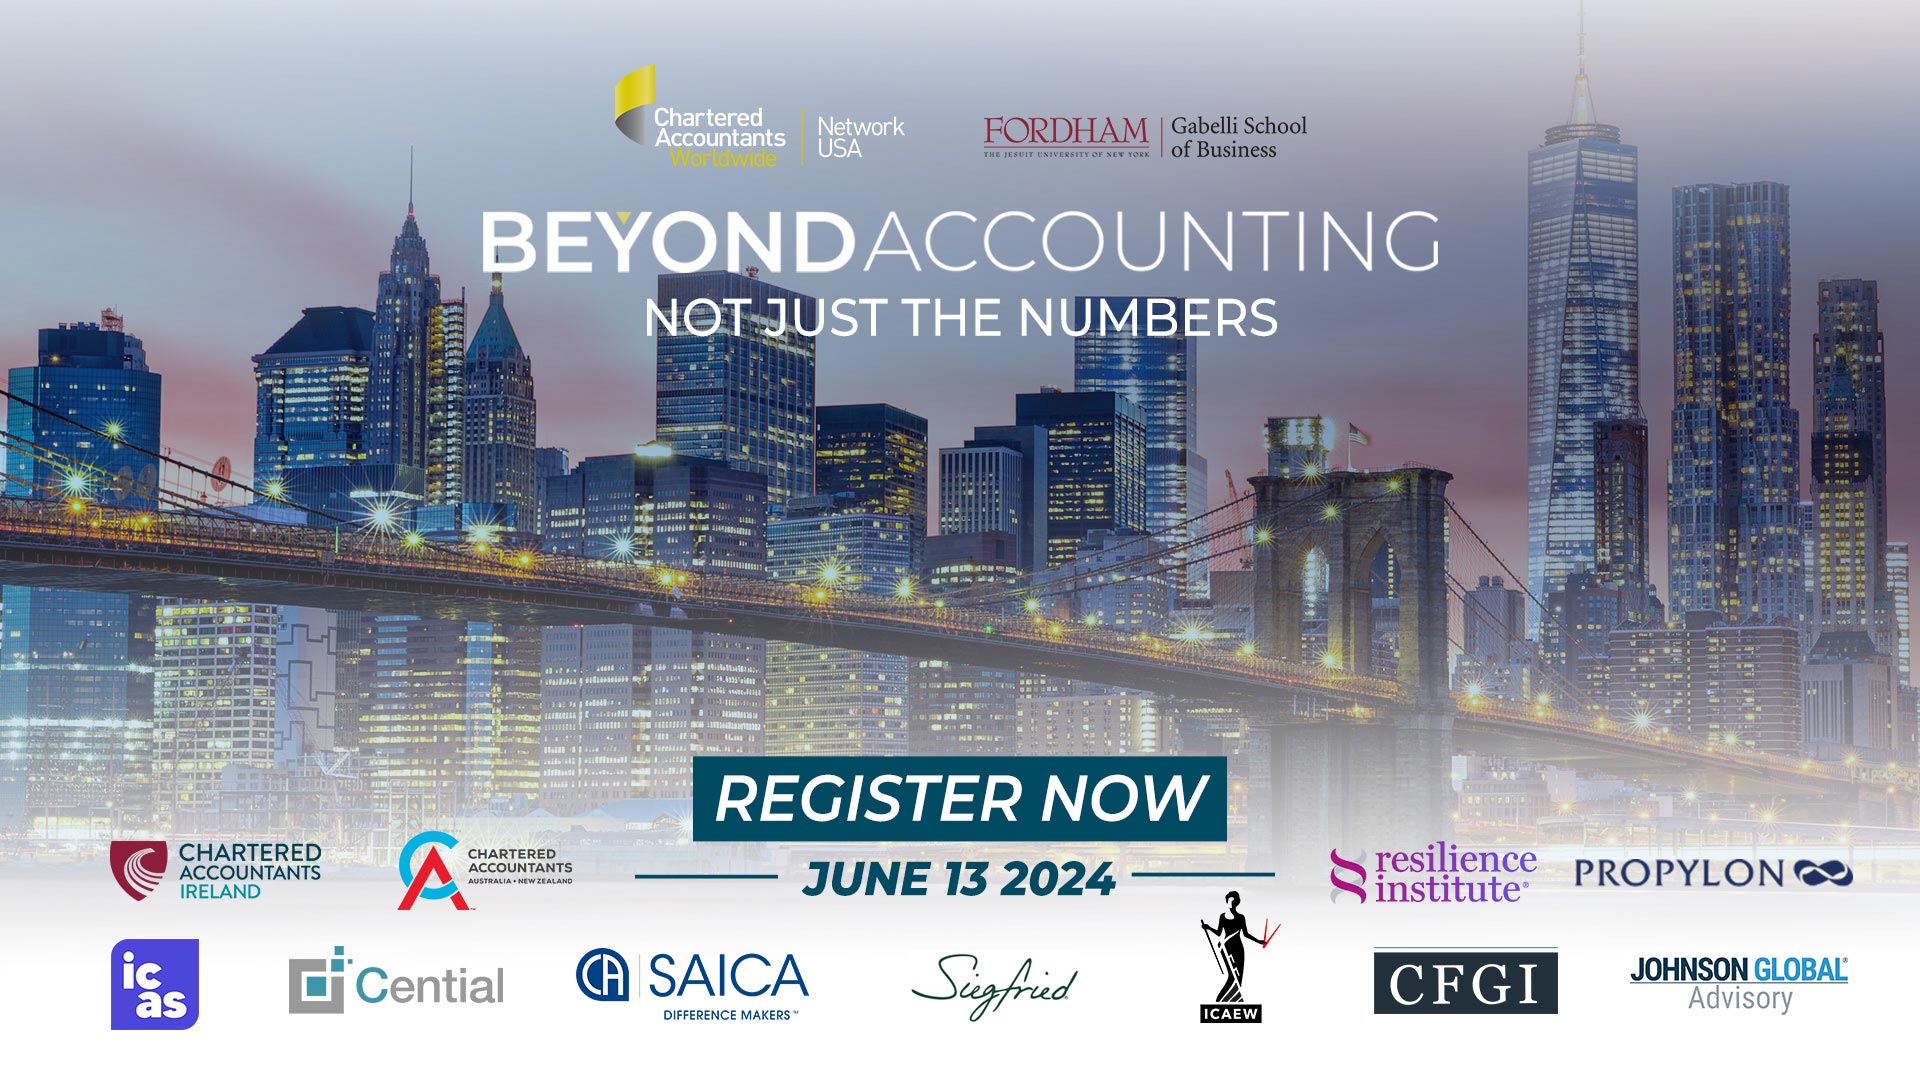 Beyond Accounting - Not Just the Numbers